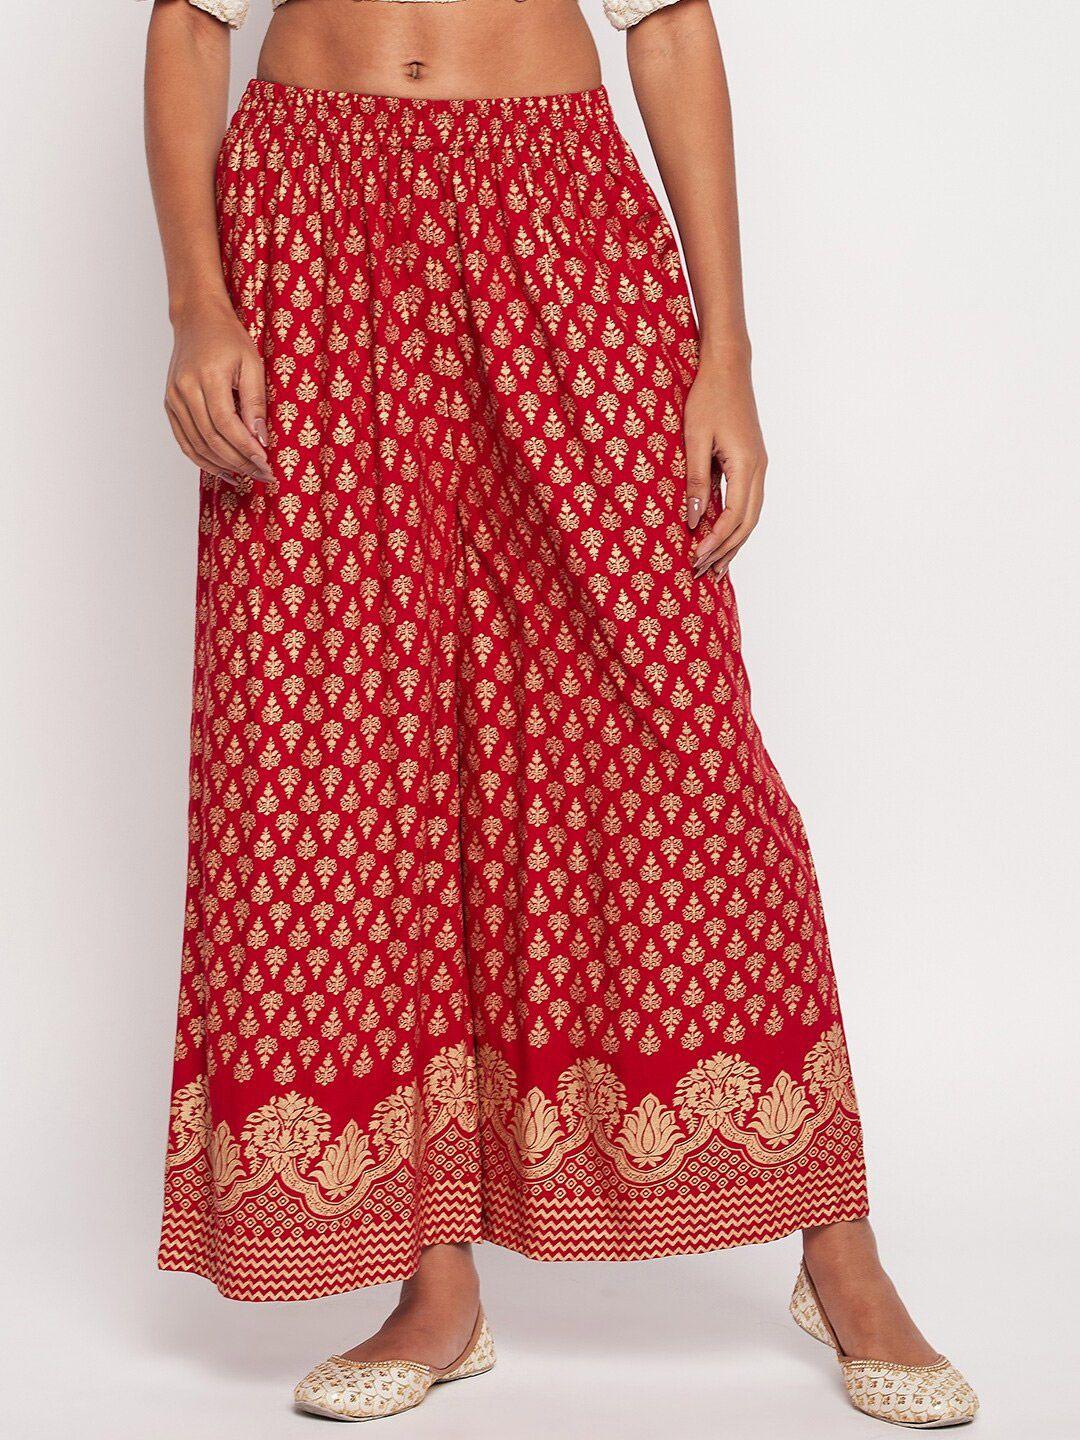 tulip-21-women-floral-printed-flared-ethnic-palazzos